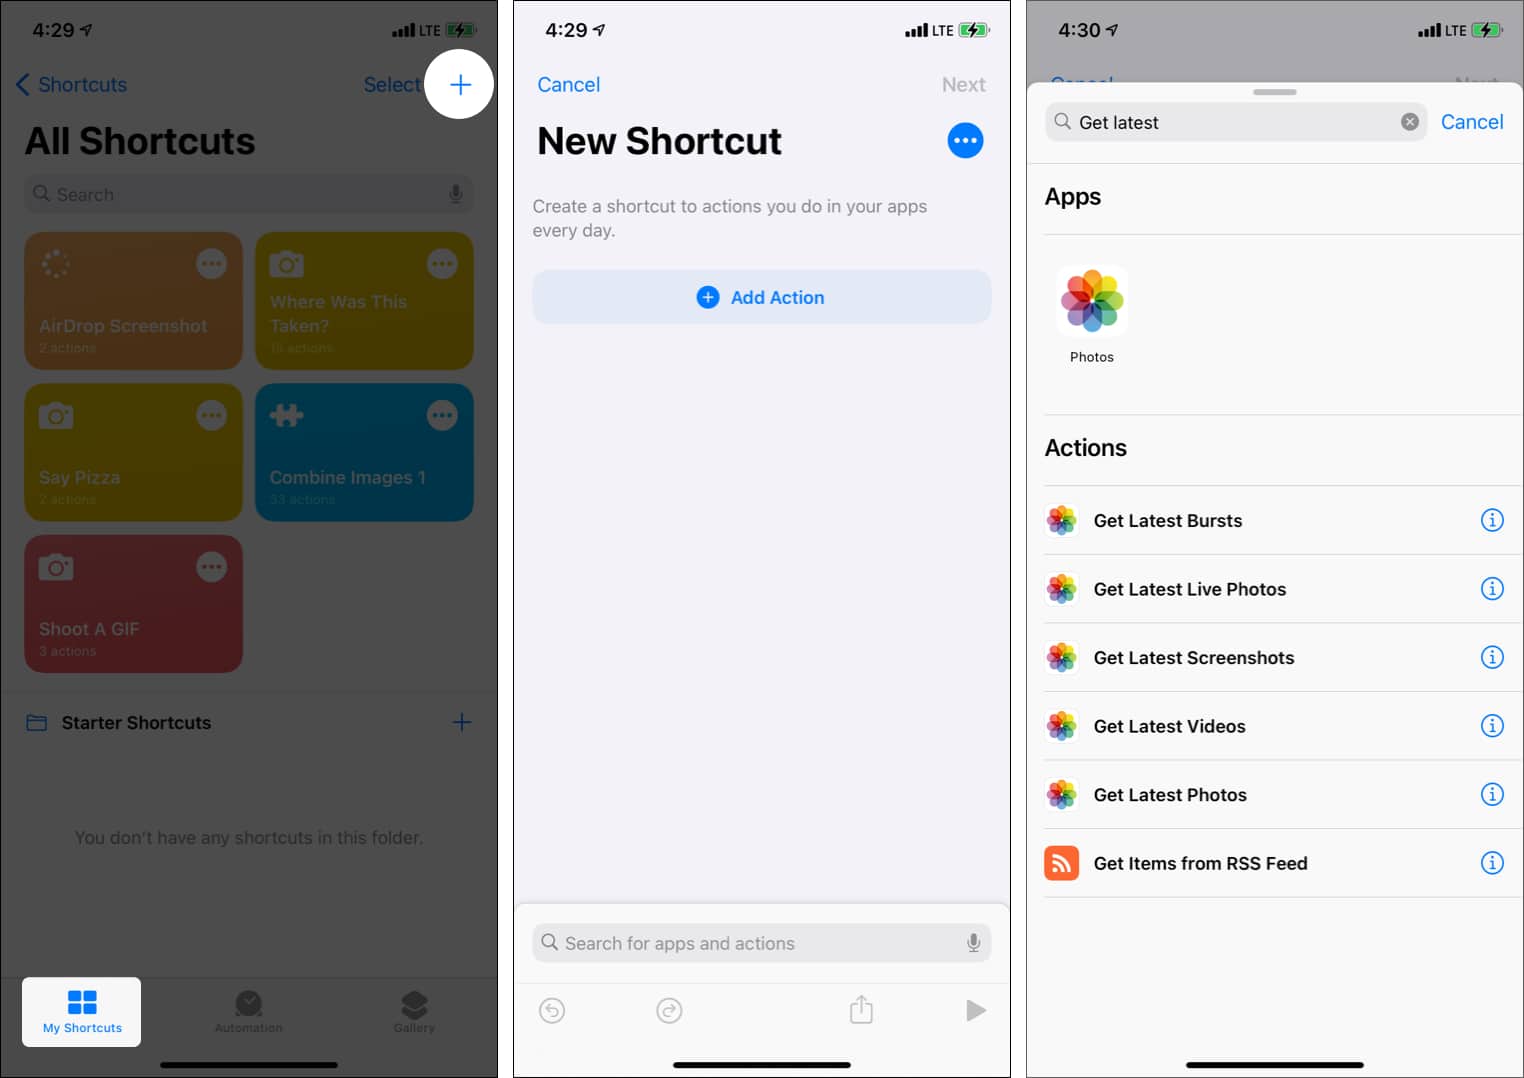 Create new shortcut and choose to get latest photos